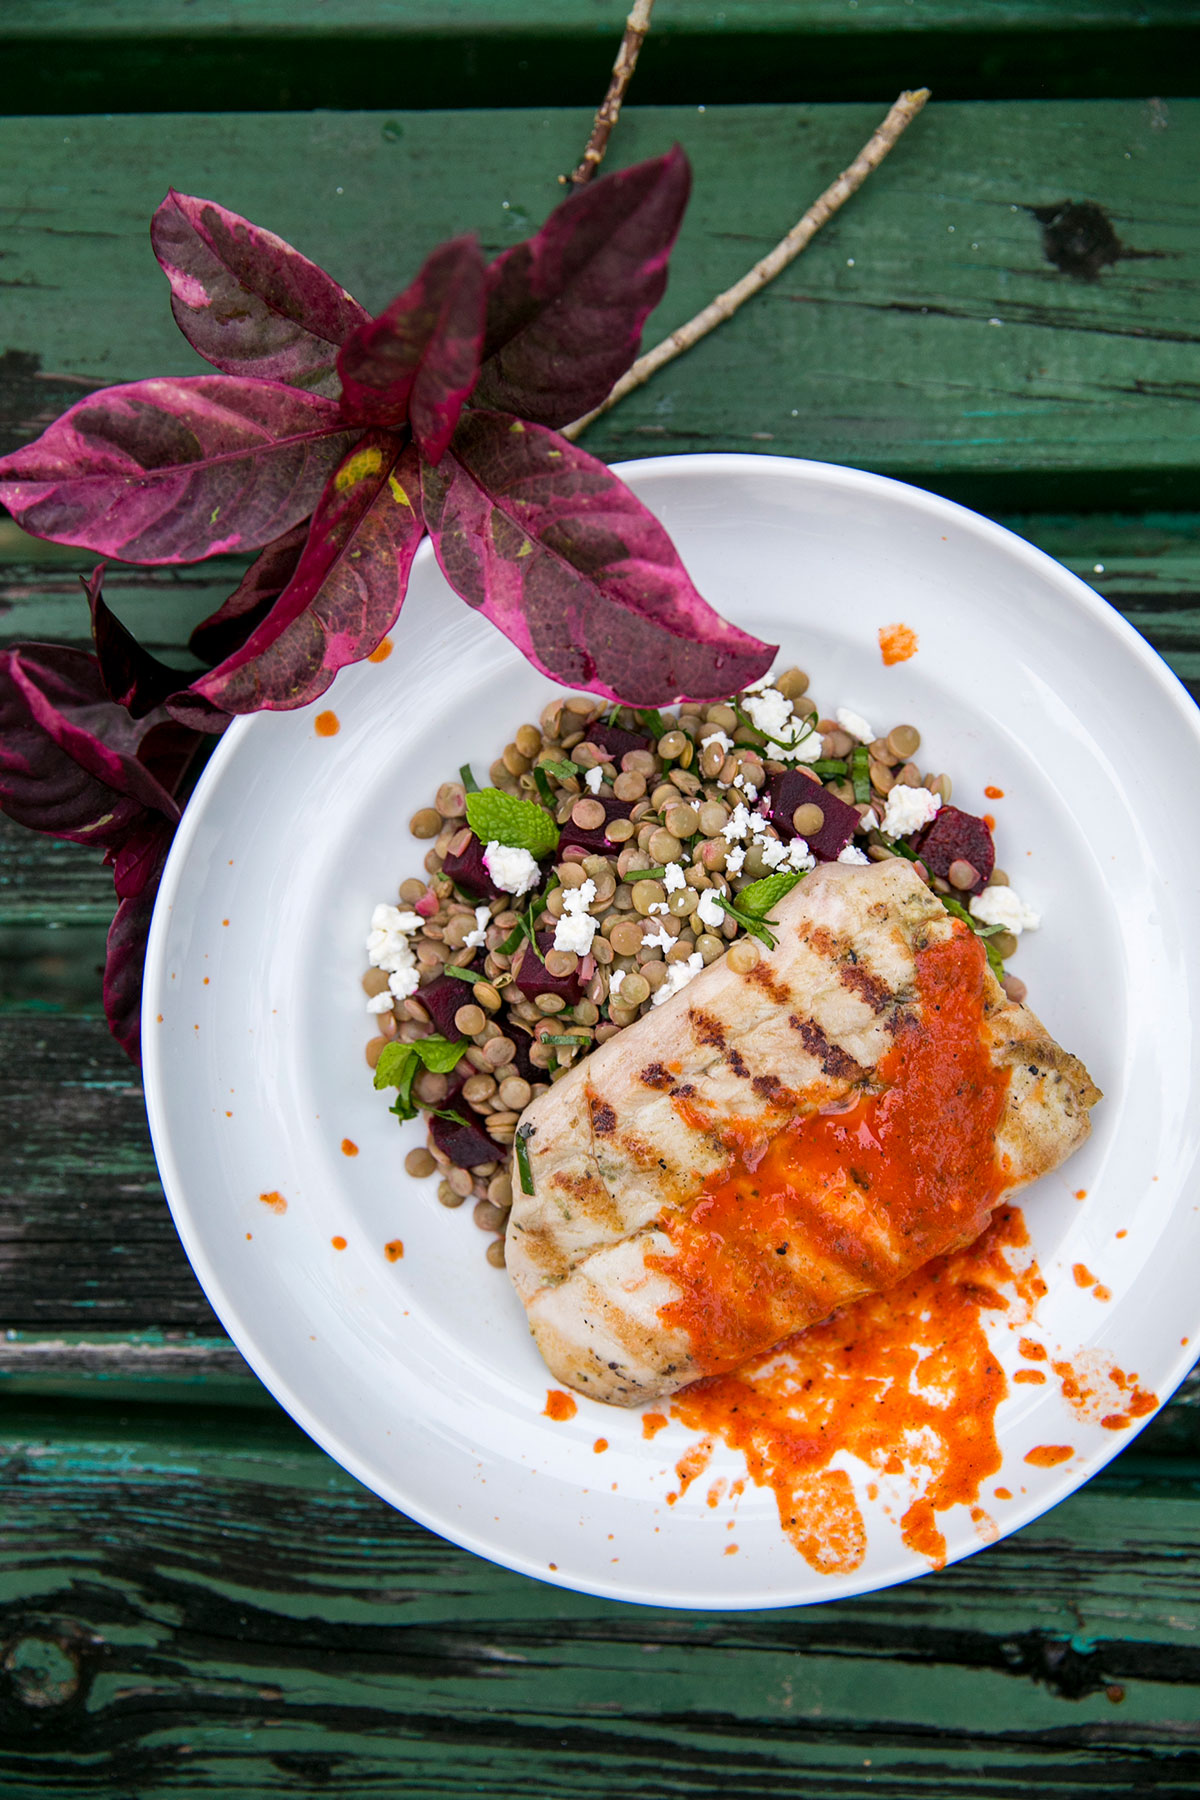 Top Your Grilled Fish with a Sweet Roasted Red Pepper Sauce